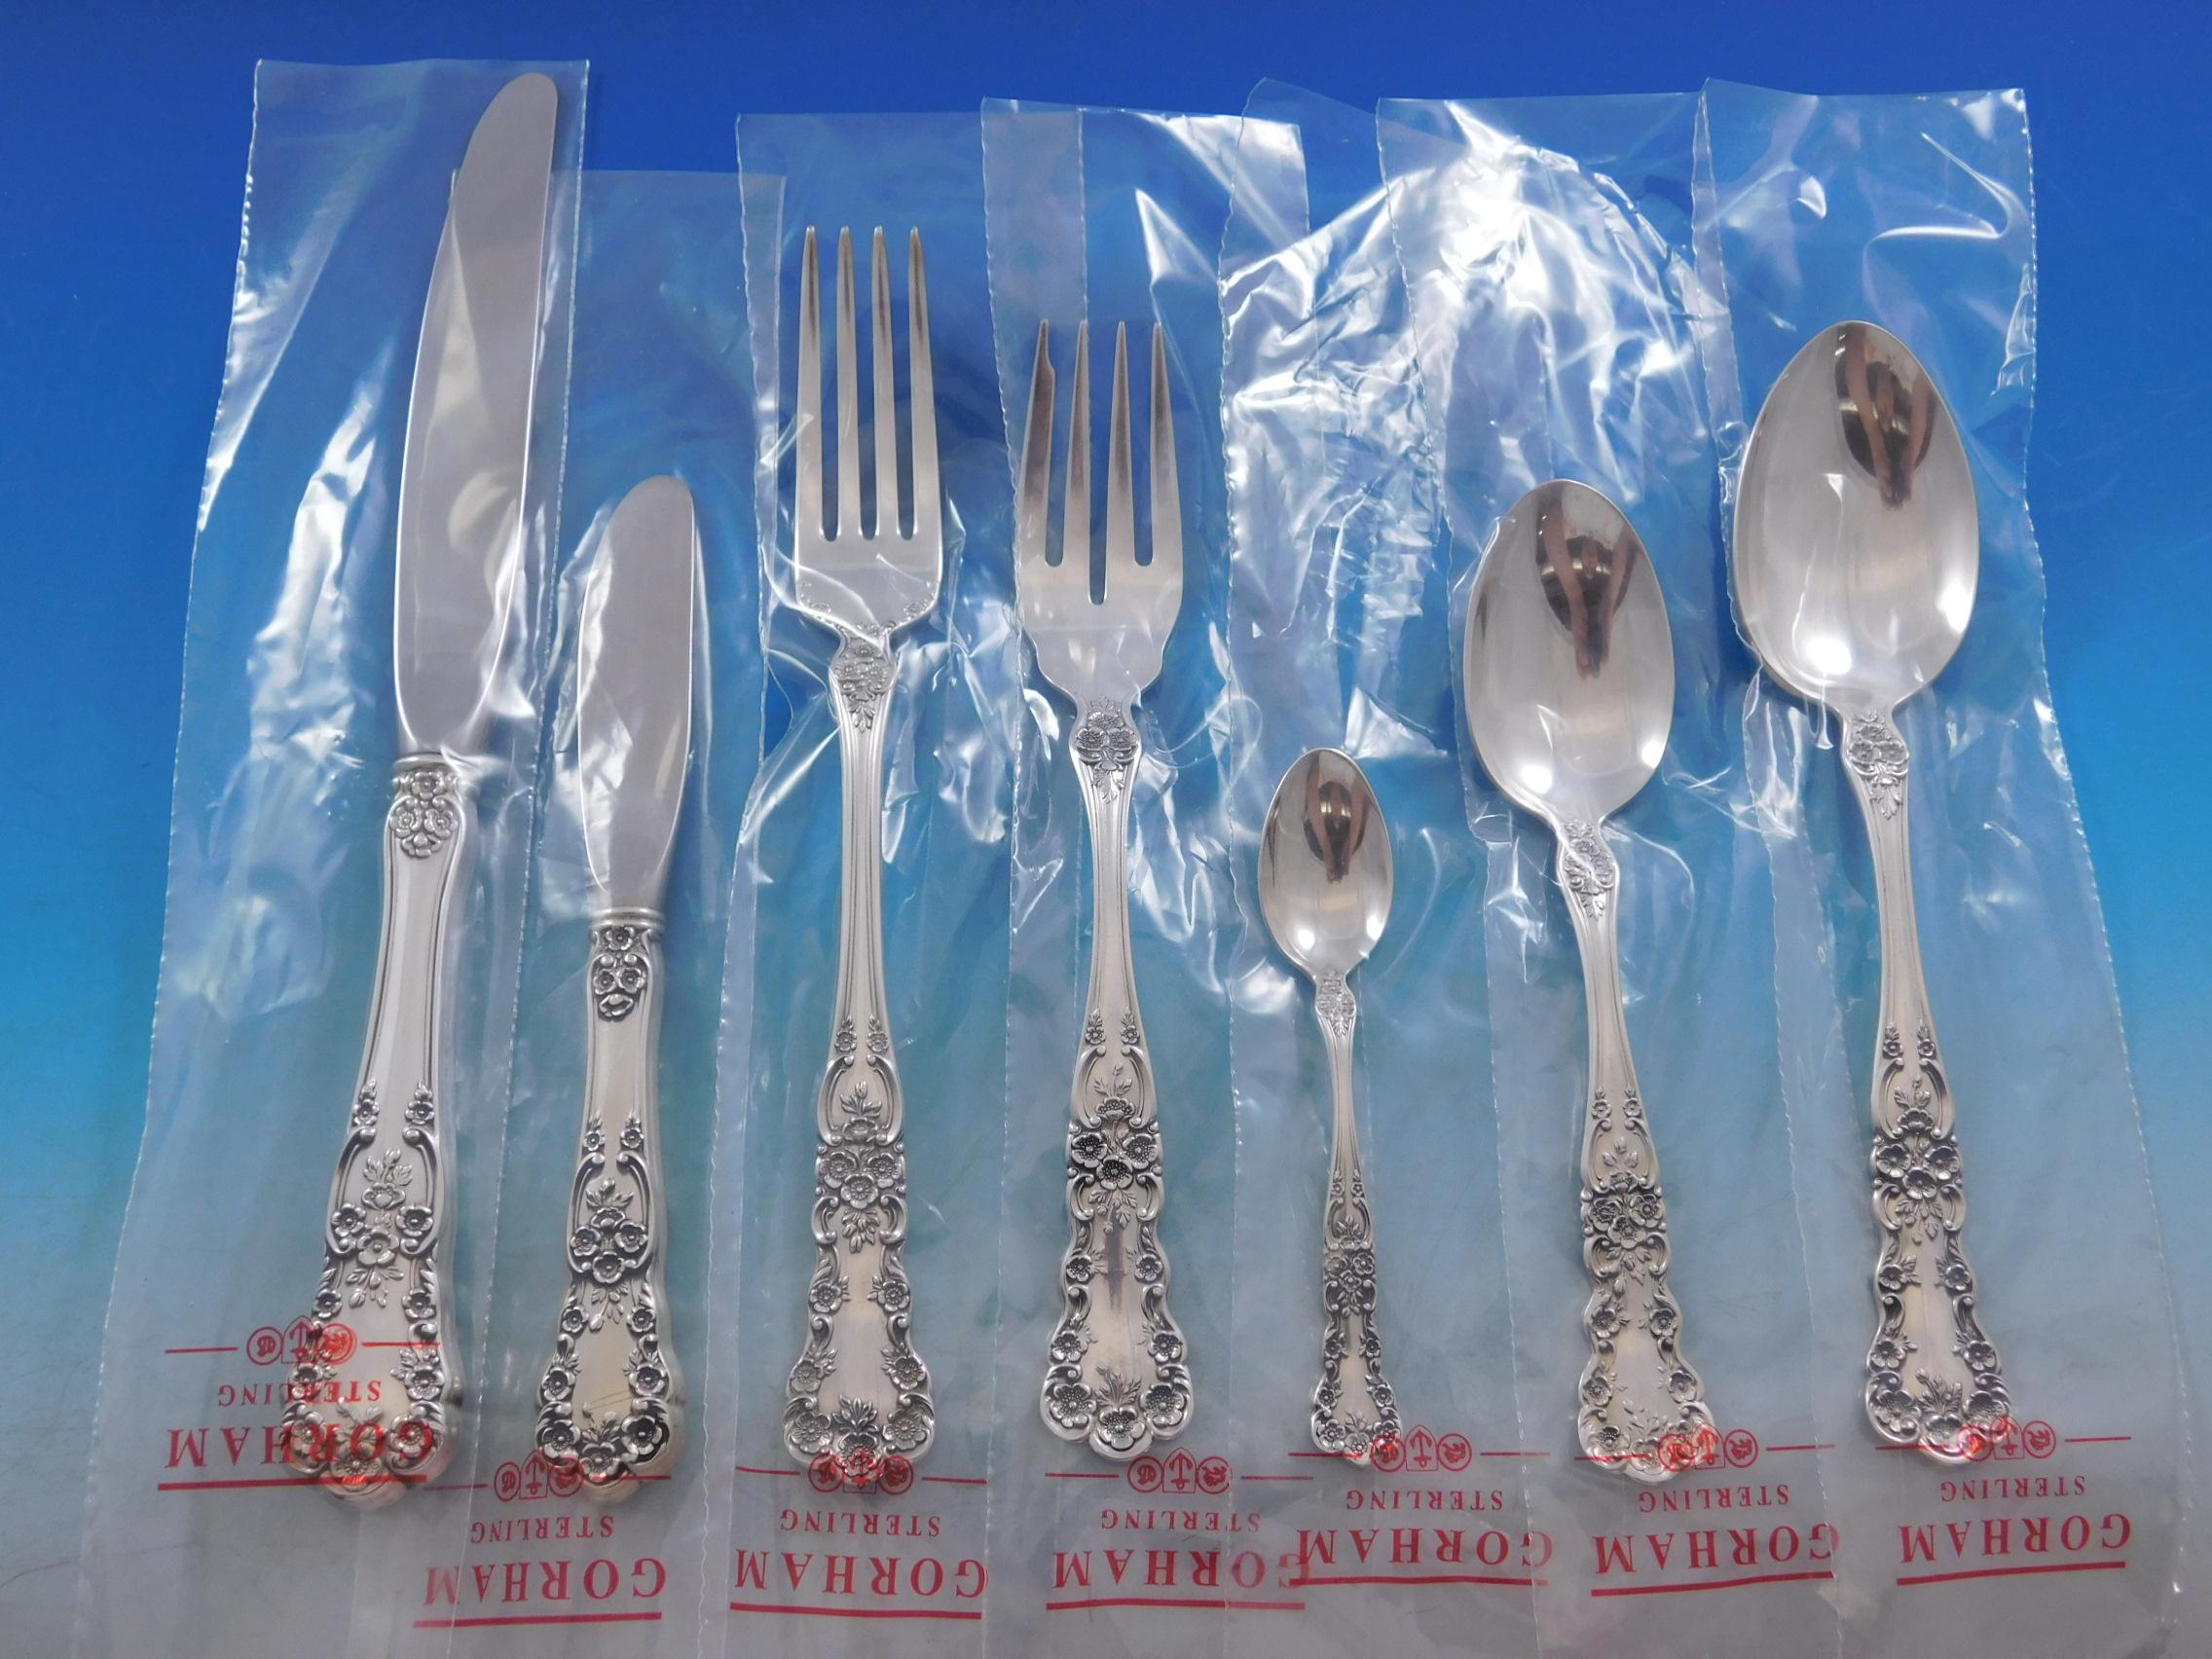 
Unused Place size buttercup by Gorham sterling silver Flatware set - 91 pieces. This set includes:

 12 Place Size Knives, 9 1/4